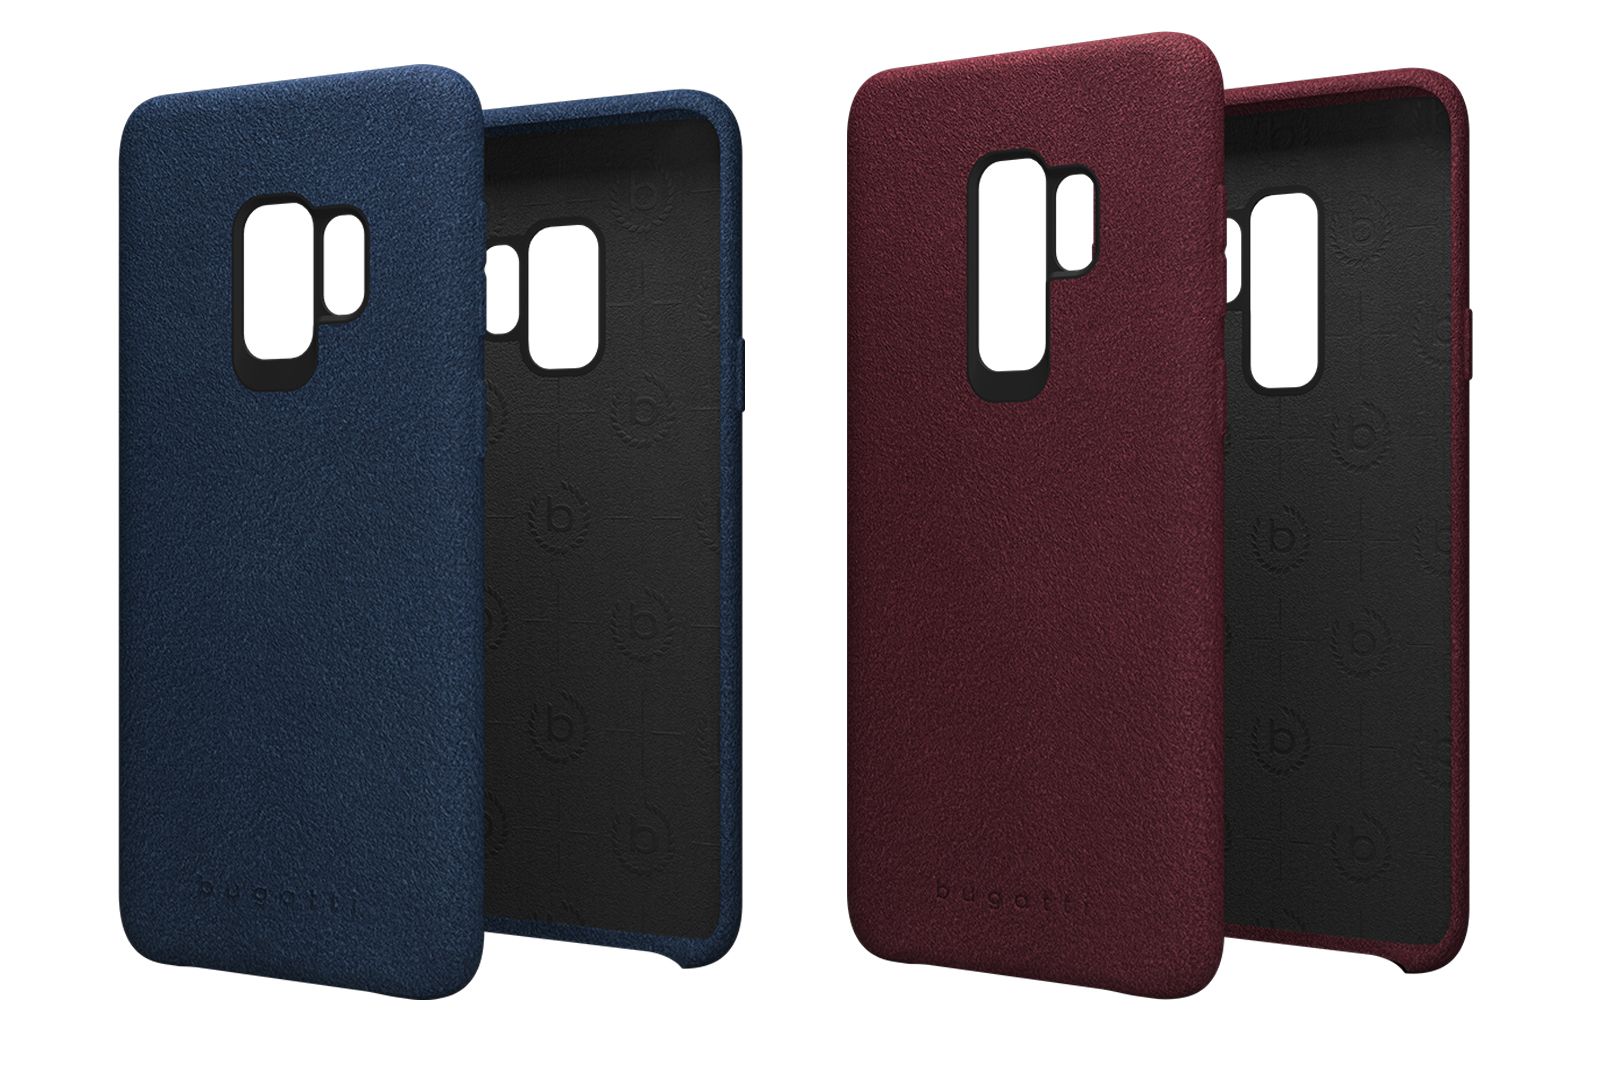 Best Samsung Galaxy S9 and S9 cases Protect your new Galaxy smartphone image 21